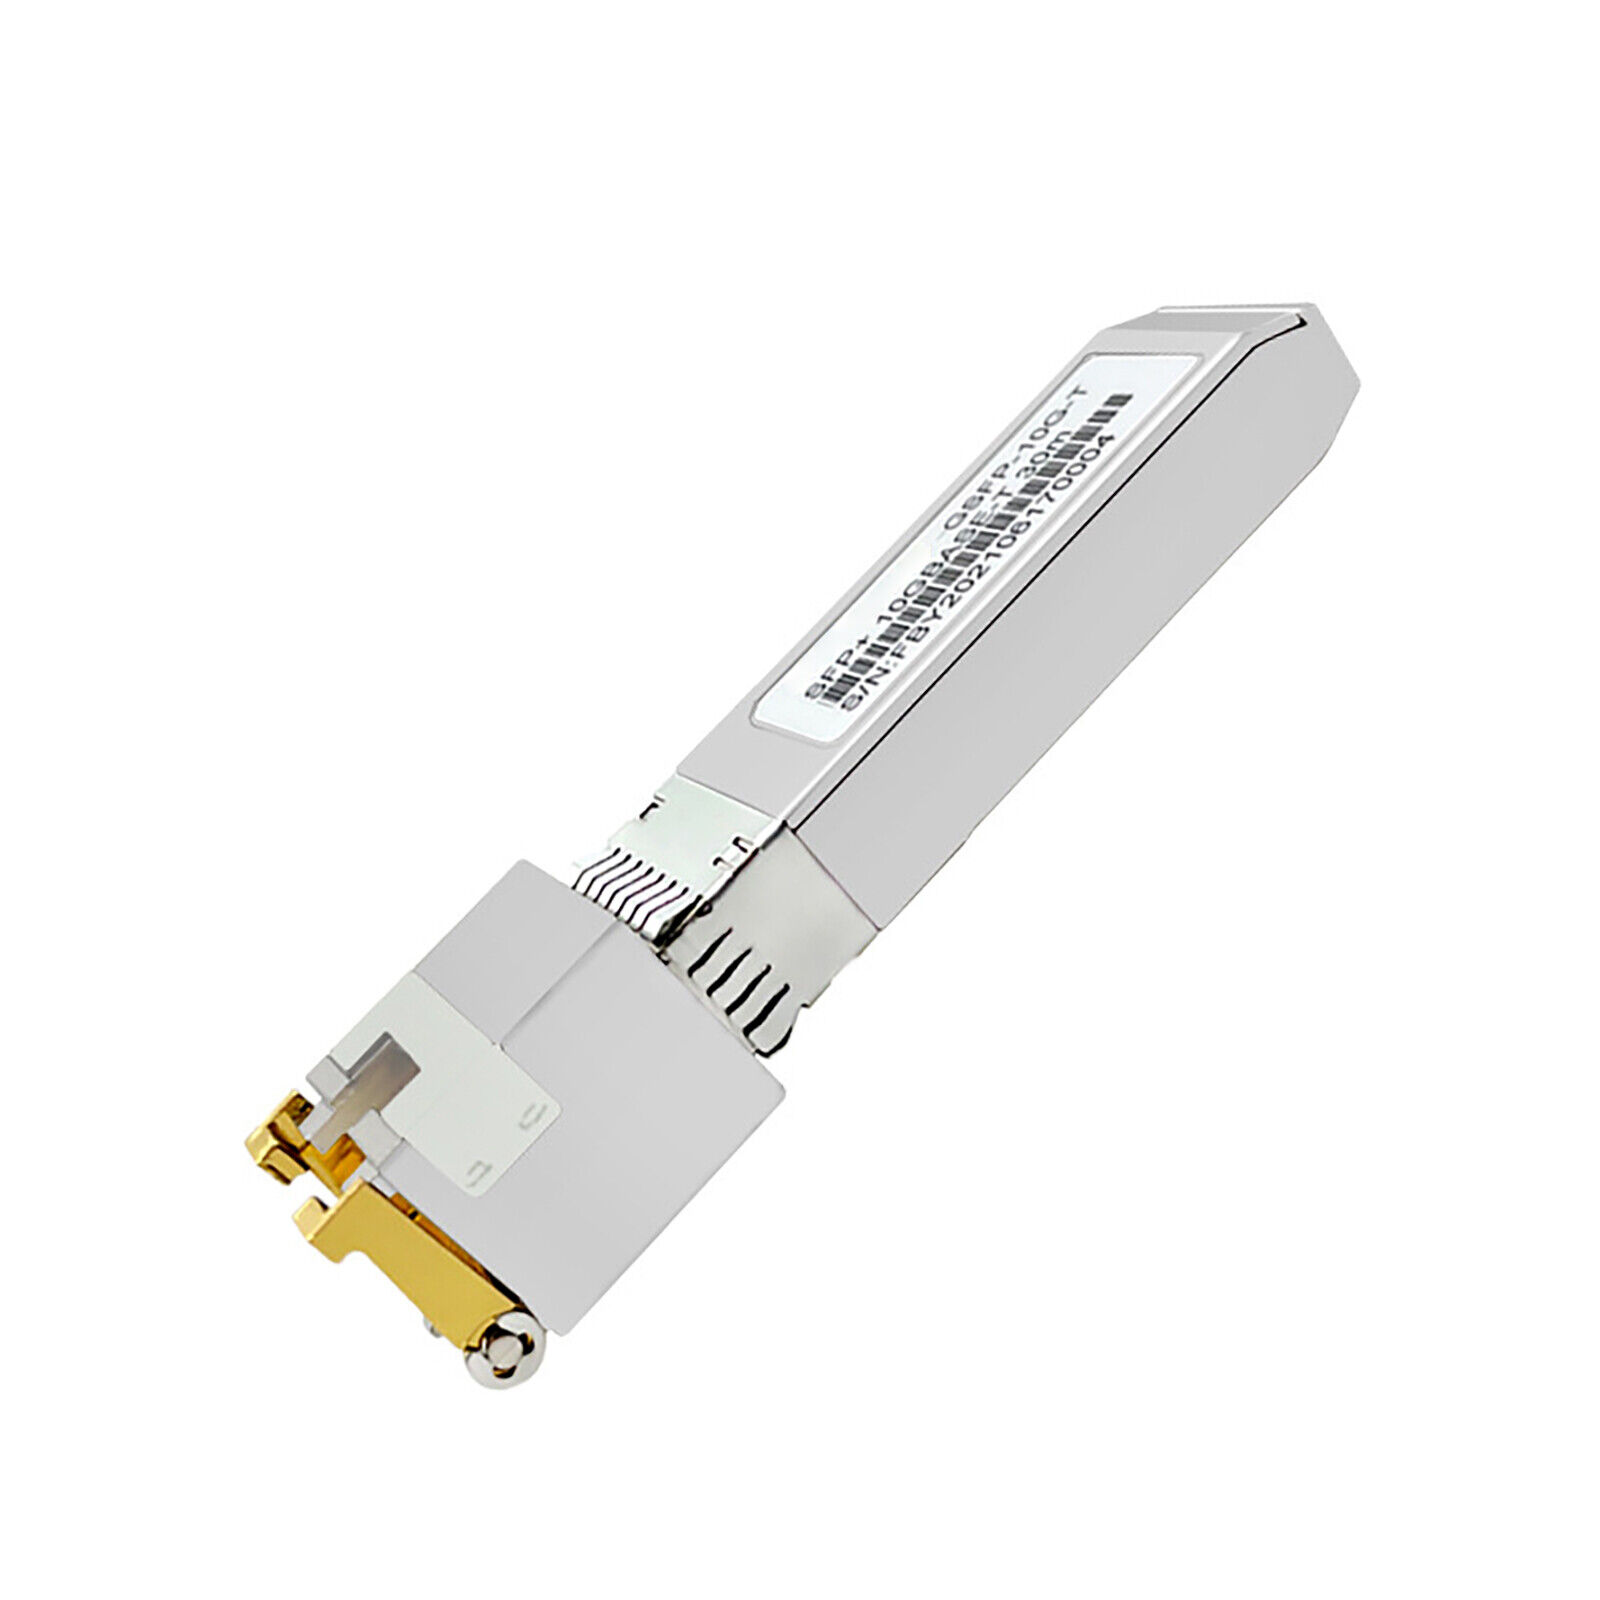 1Pcs 10GBase-T SFP+ to RJ45 Copper Ethernet Modular Part Fit For Cisco Switches